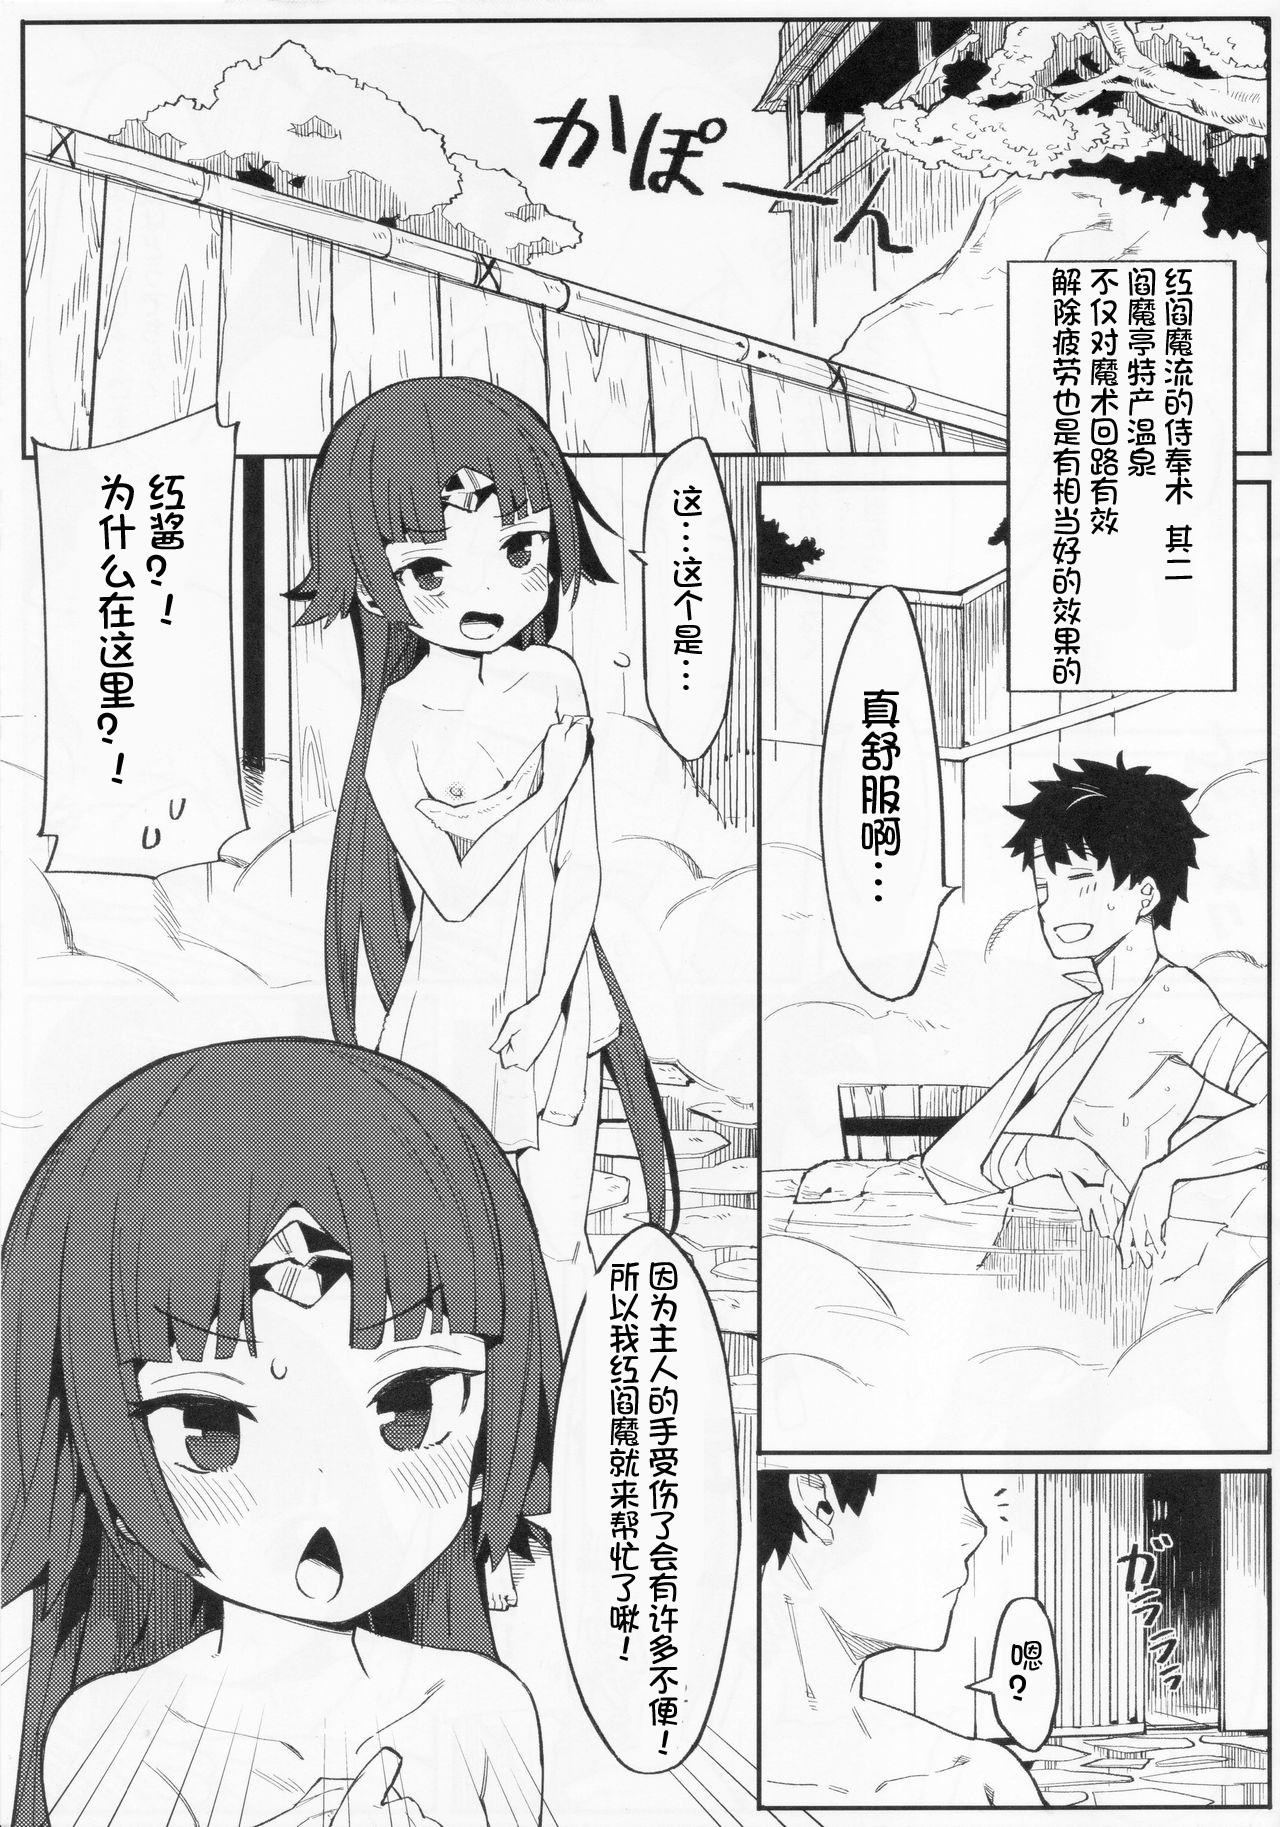 Ass Licking Enmatei Ryouyou-ki - Fate grand order Fit - Page 7